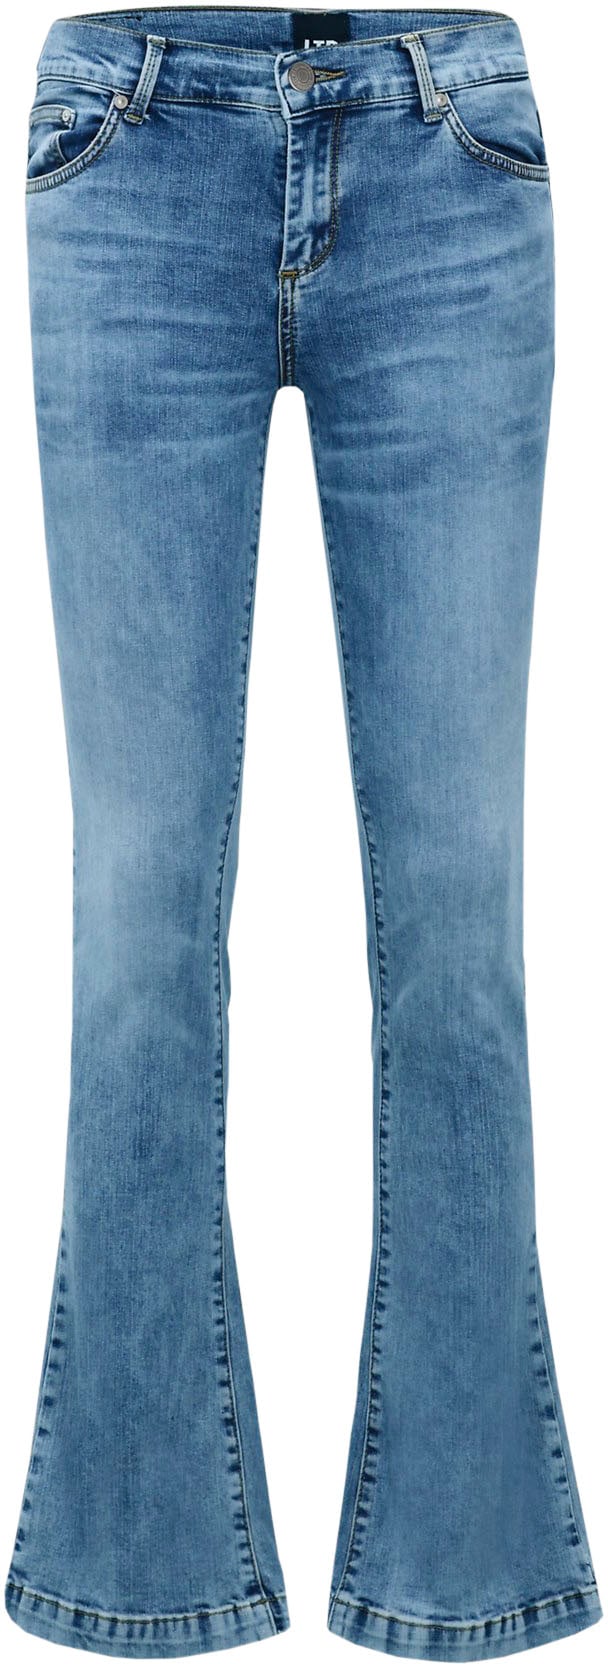 LTB Bootcut-Jeans »Fallon«, in 5-Pocket-Form bestellen bei OTTO | Stretchjeans